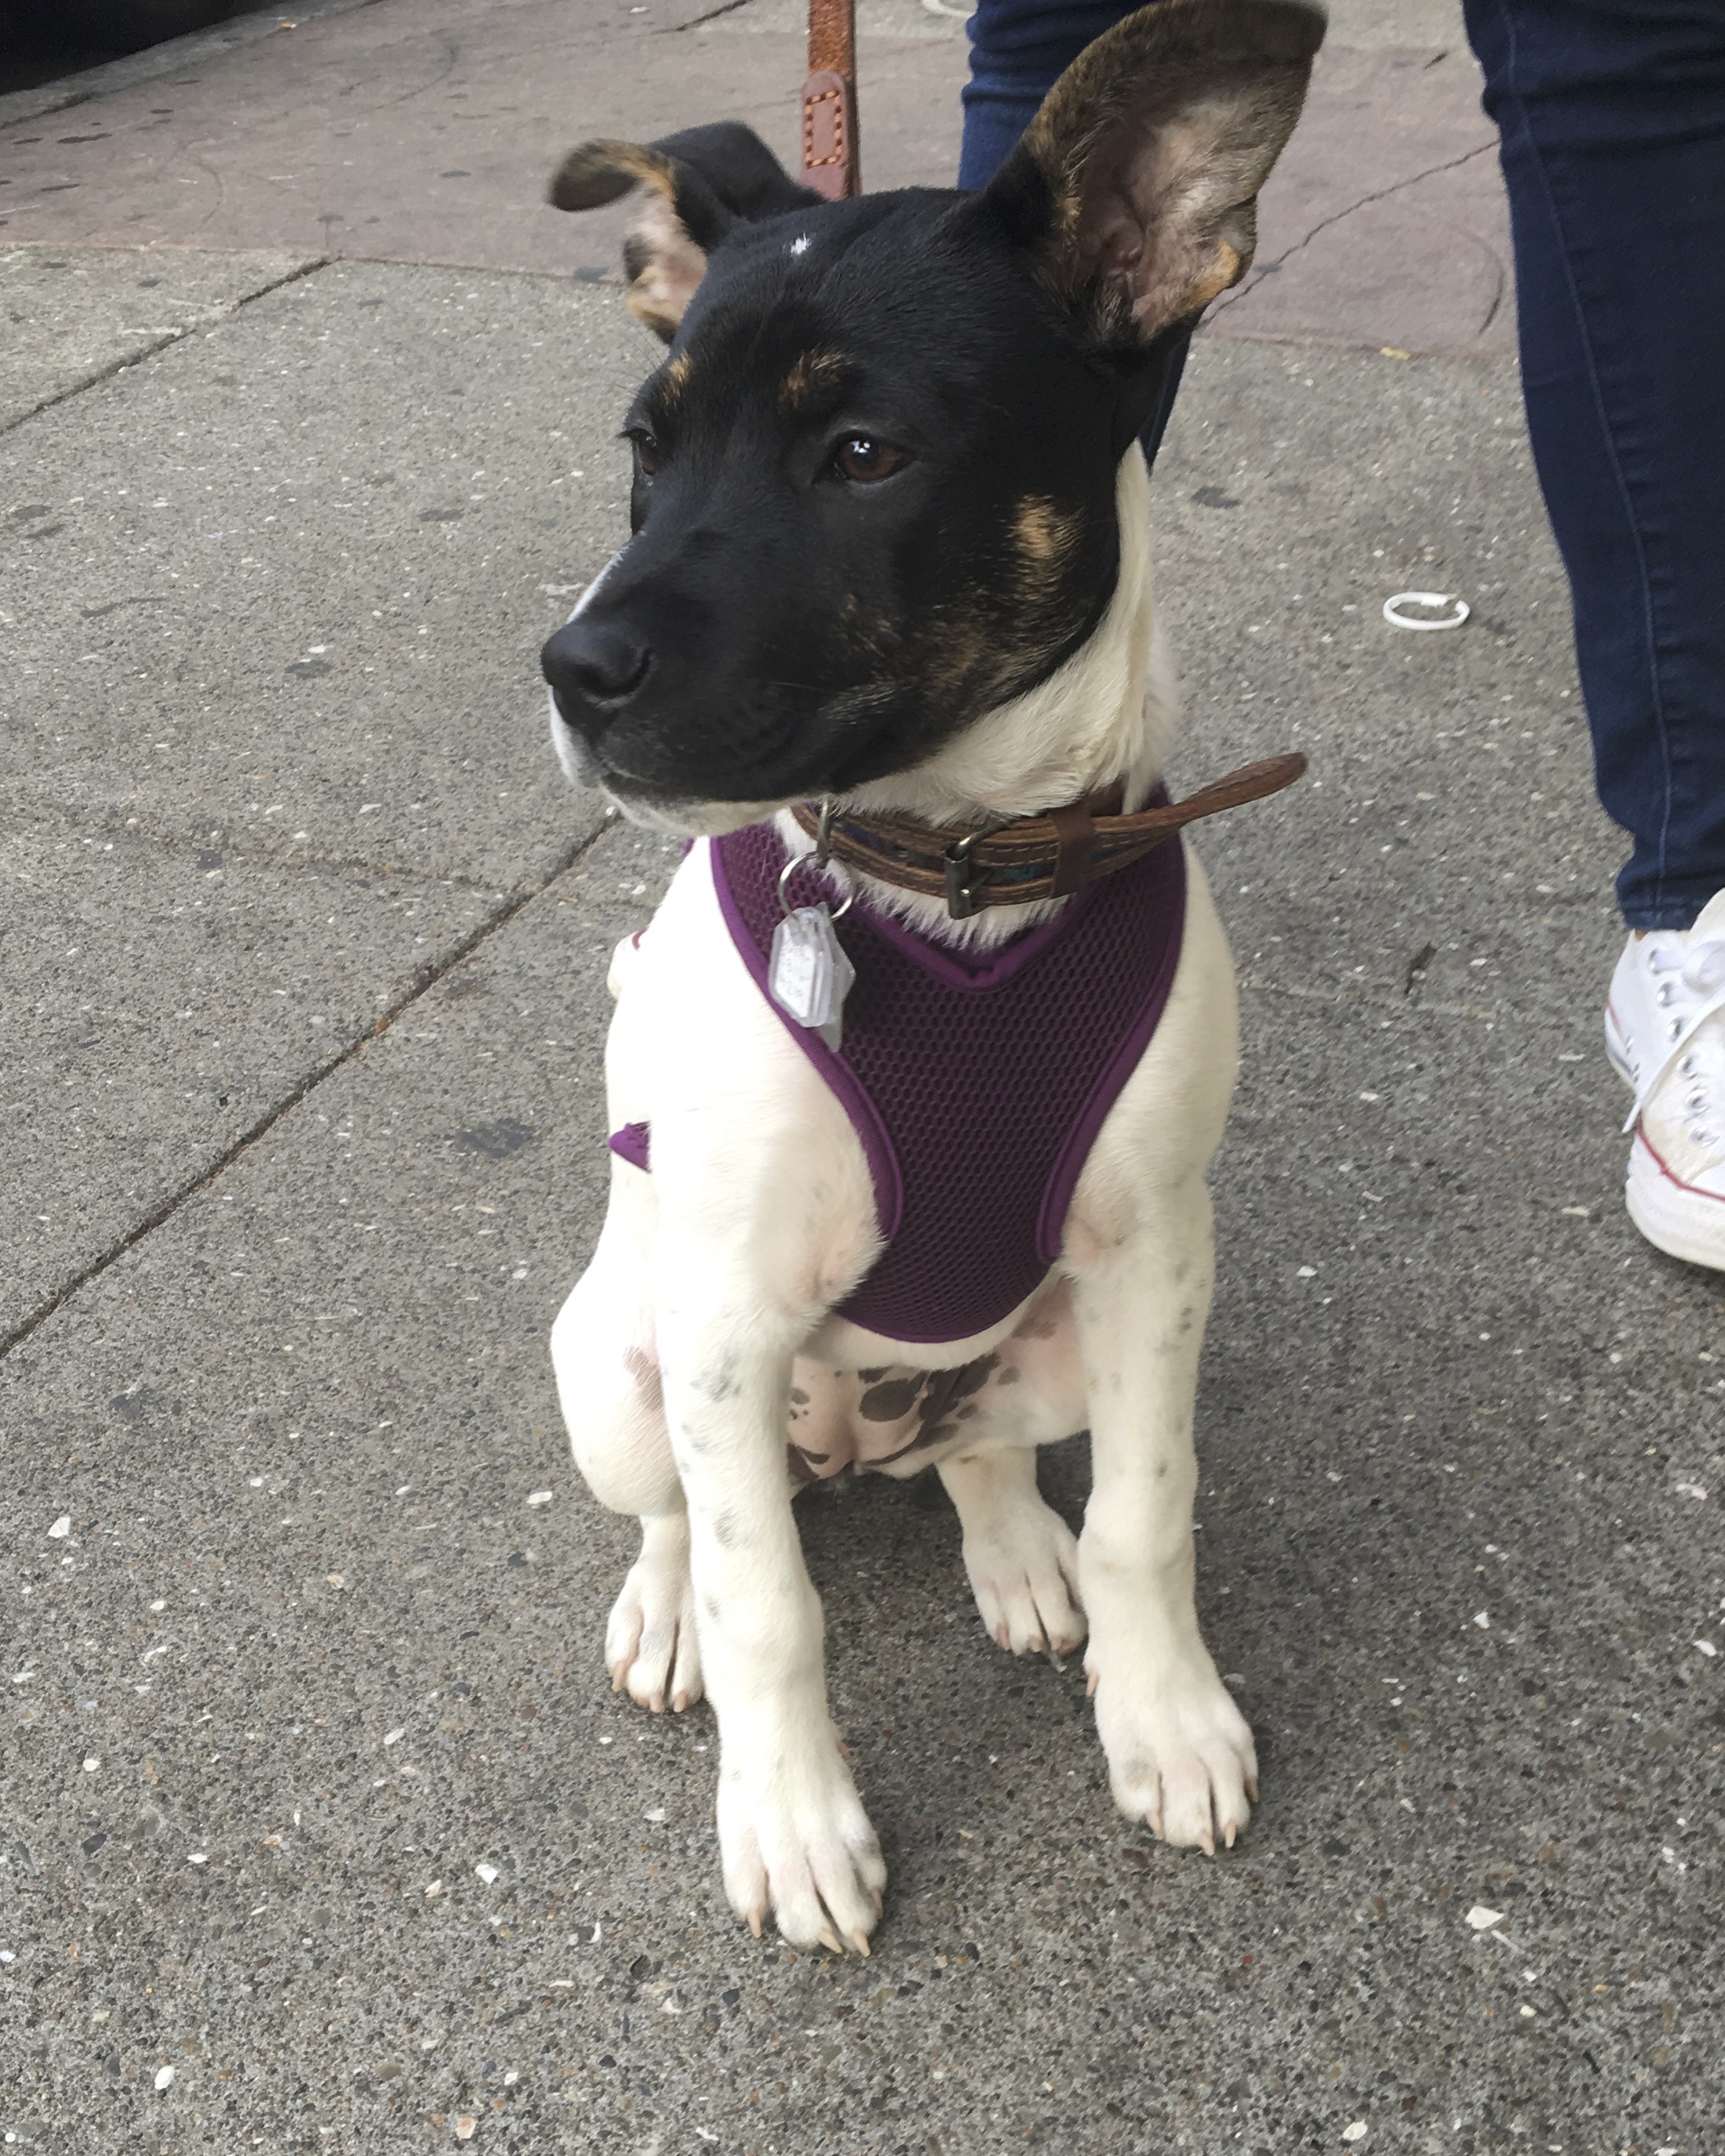 Mixed Breed Puppy With Awesome Eyebrows And Humongous Ears Looking Ostentatiously Away From Camera